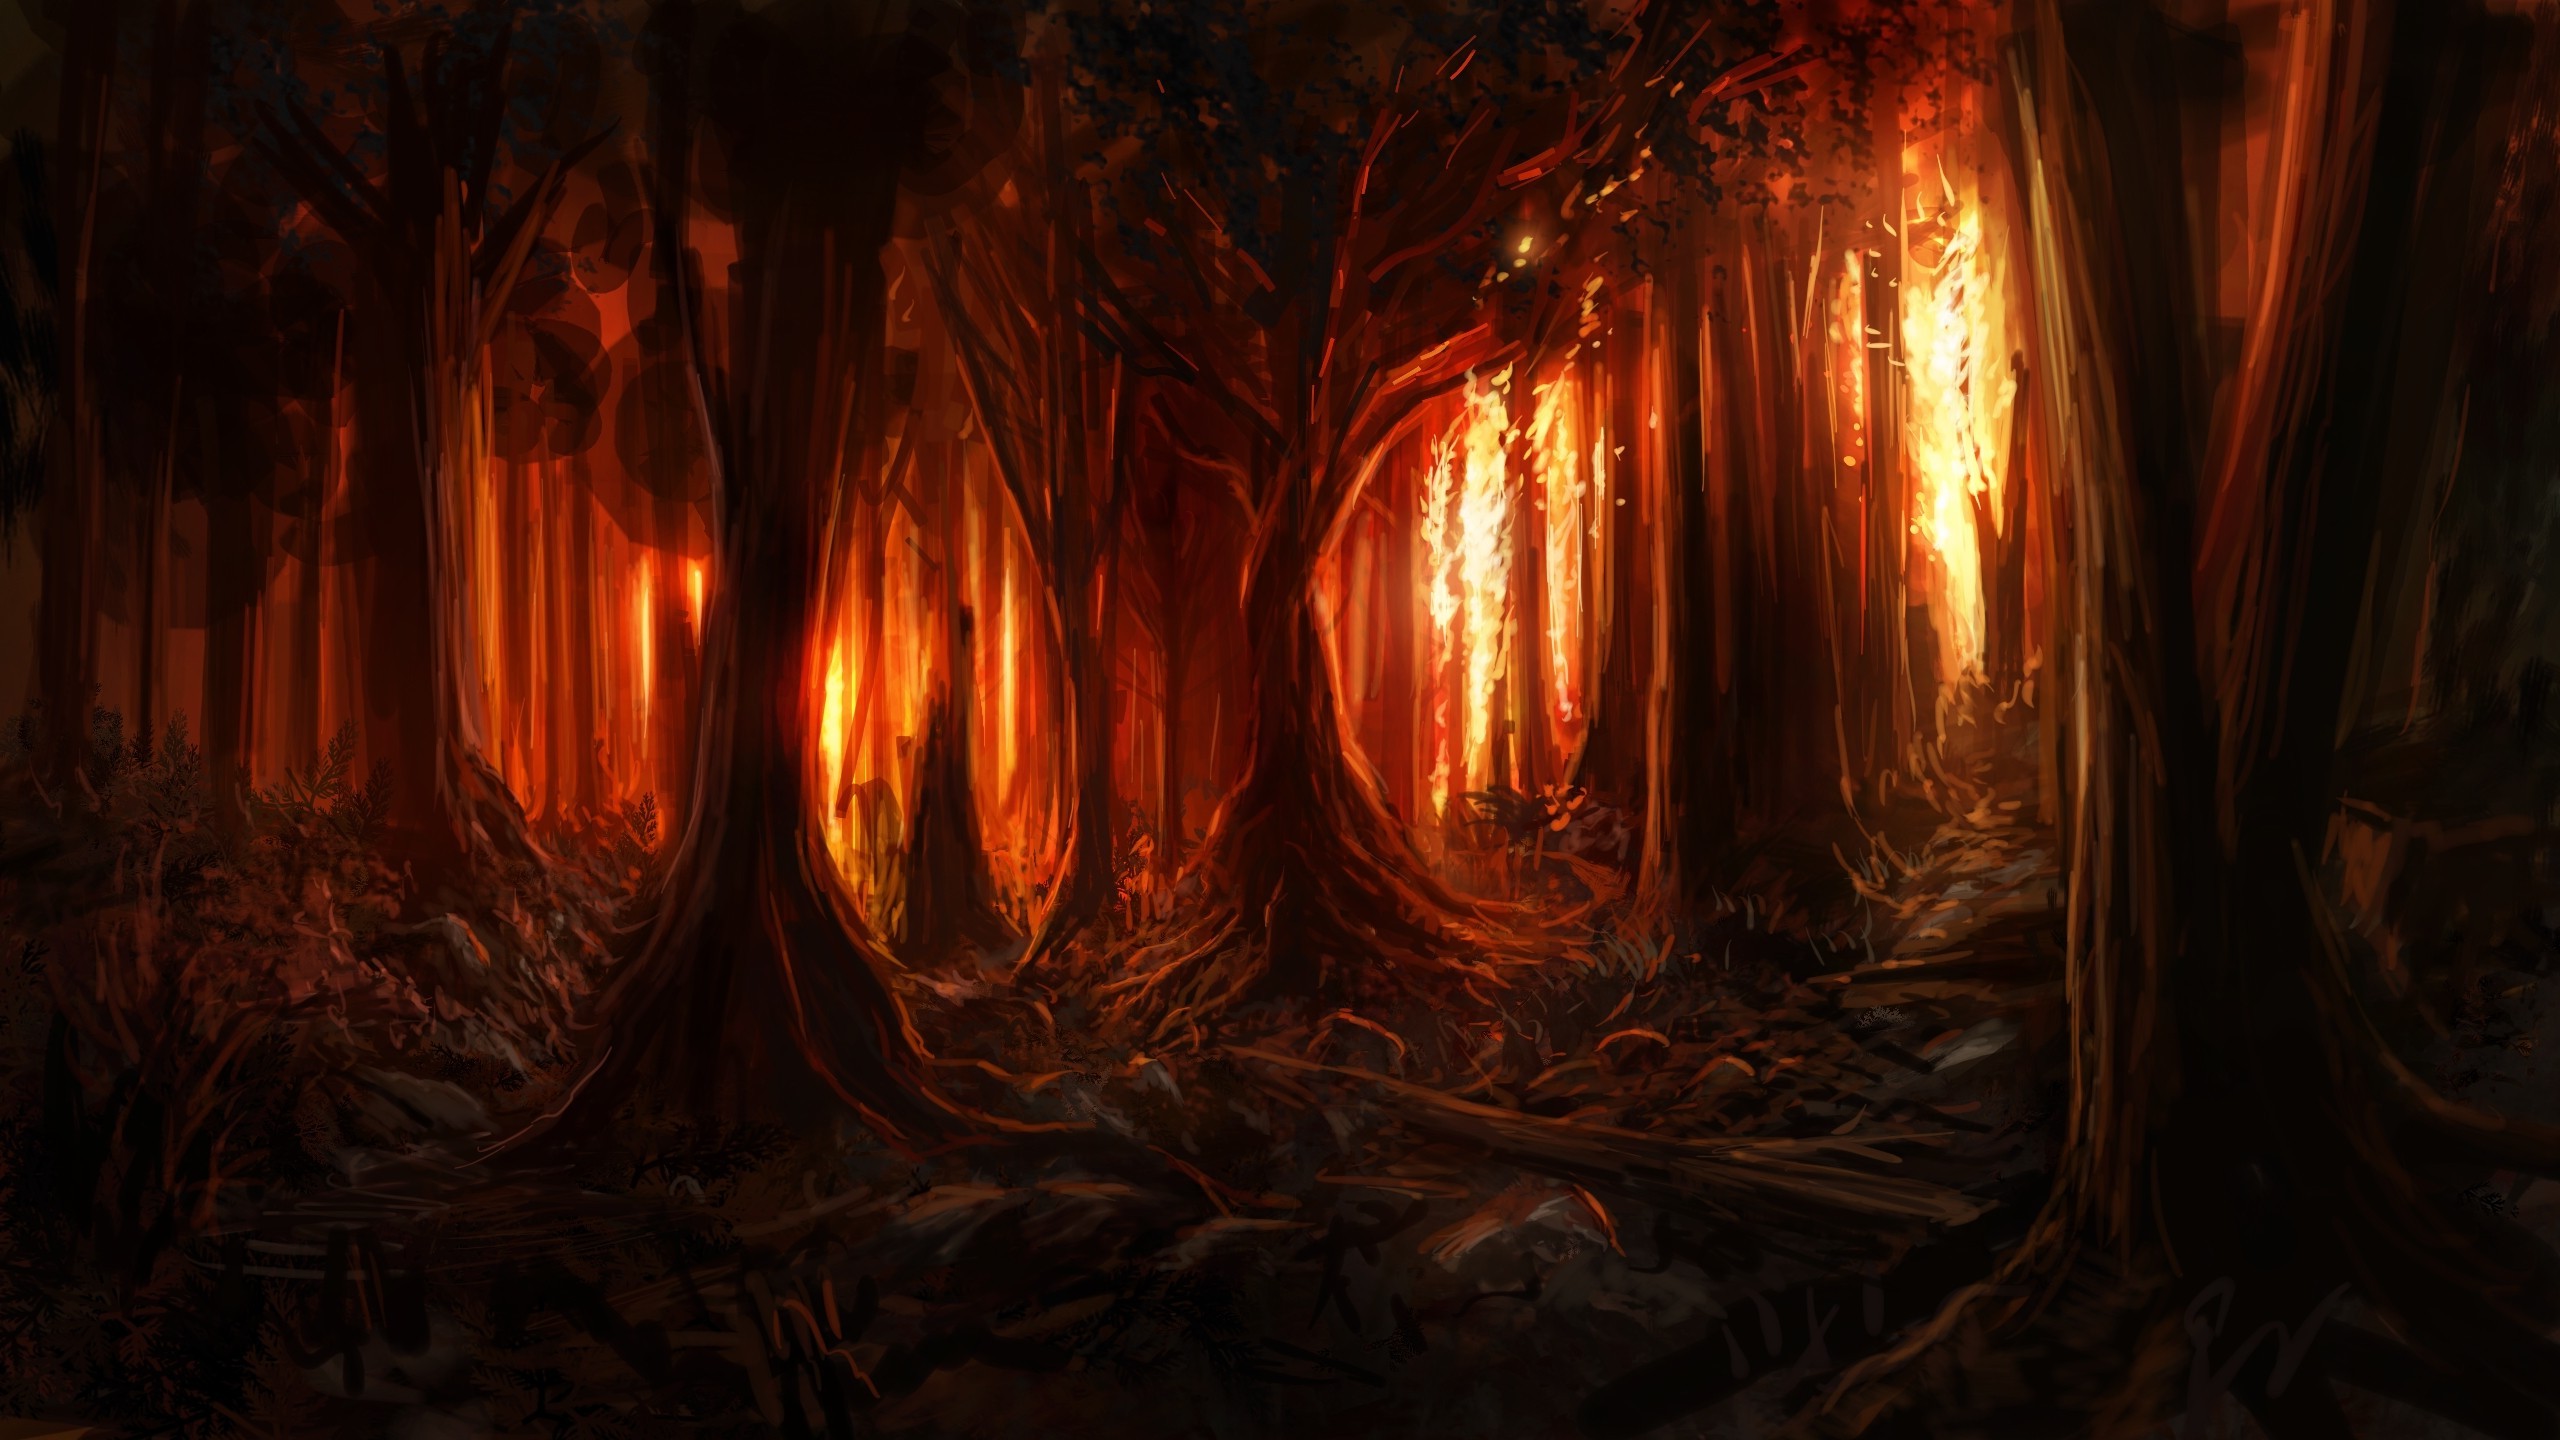 digital Art, Nature, Trees, Forest, Painting, Burning, Fire, Wood